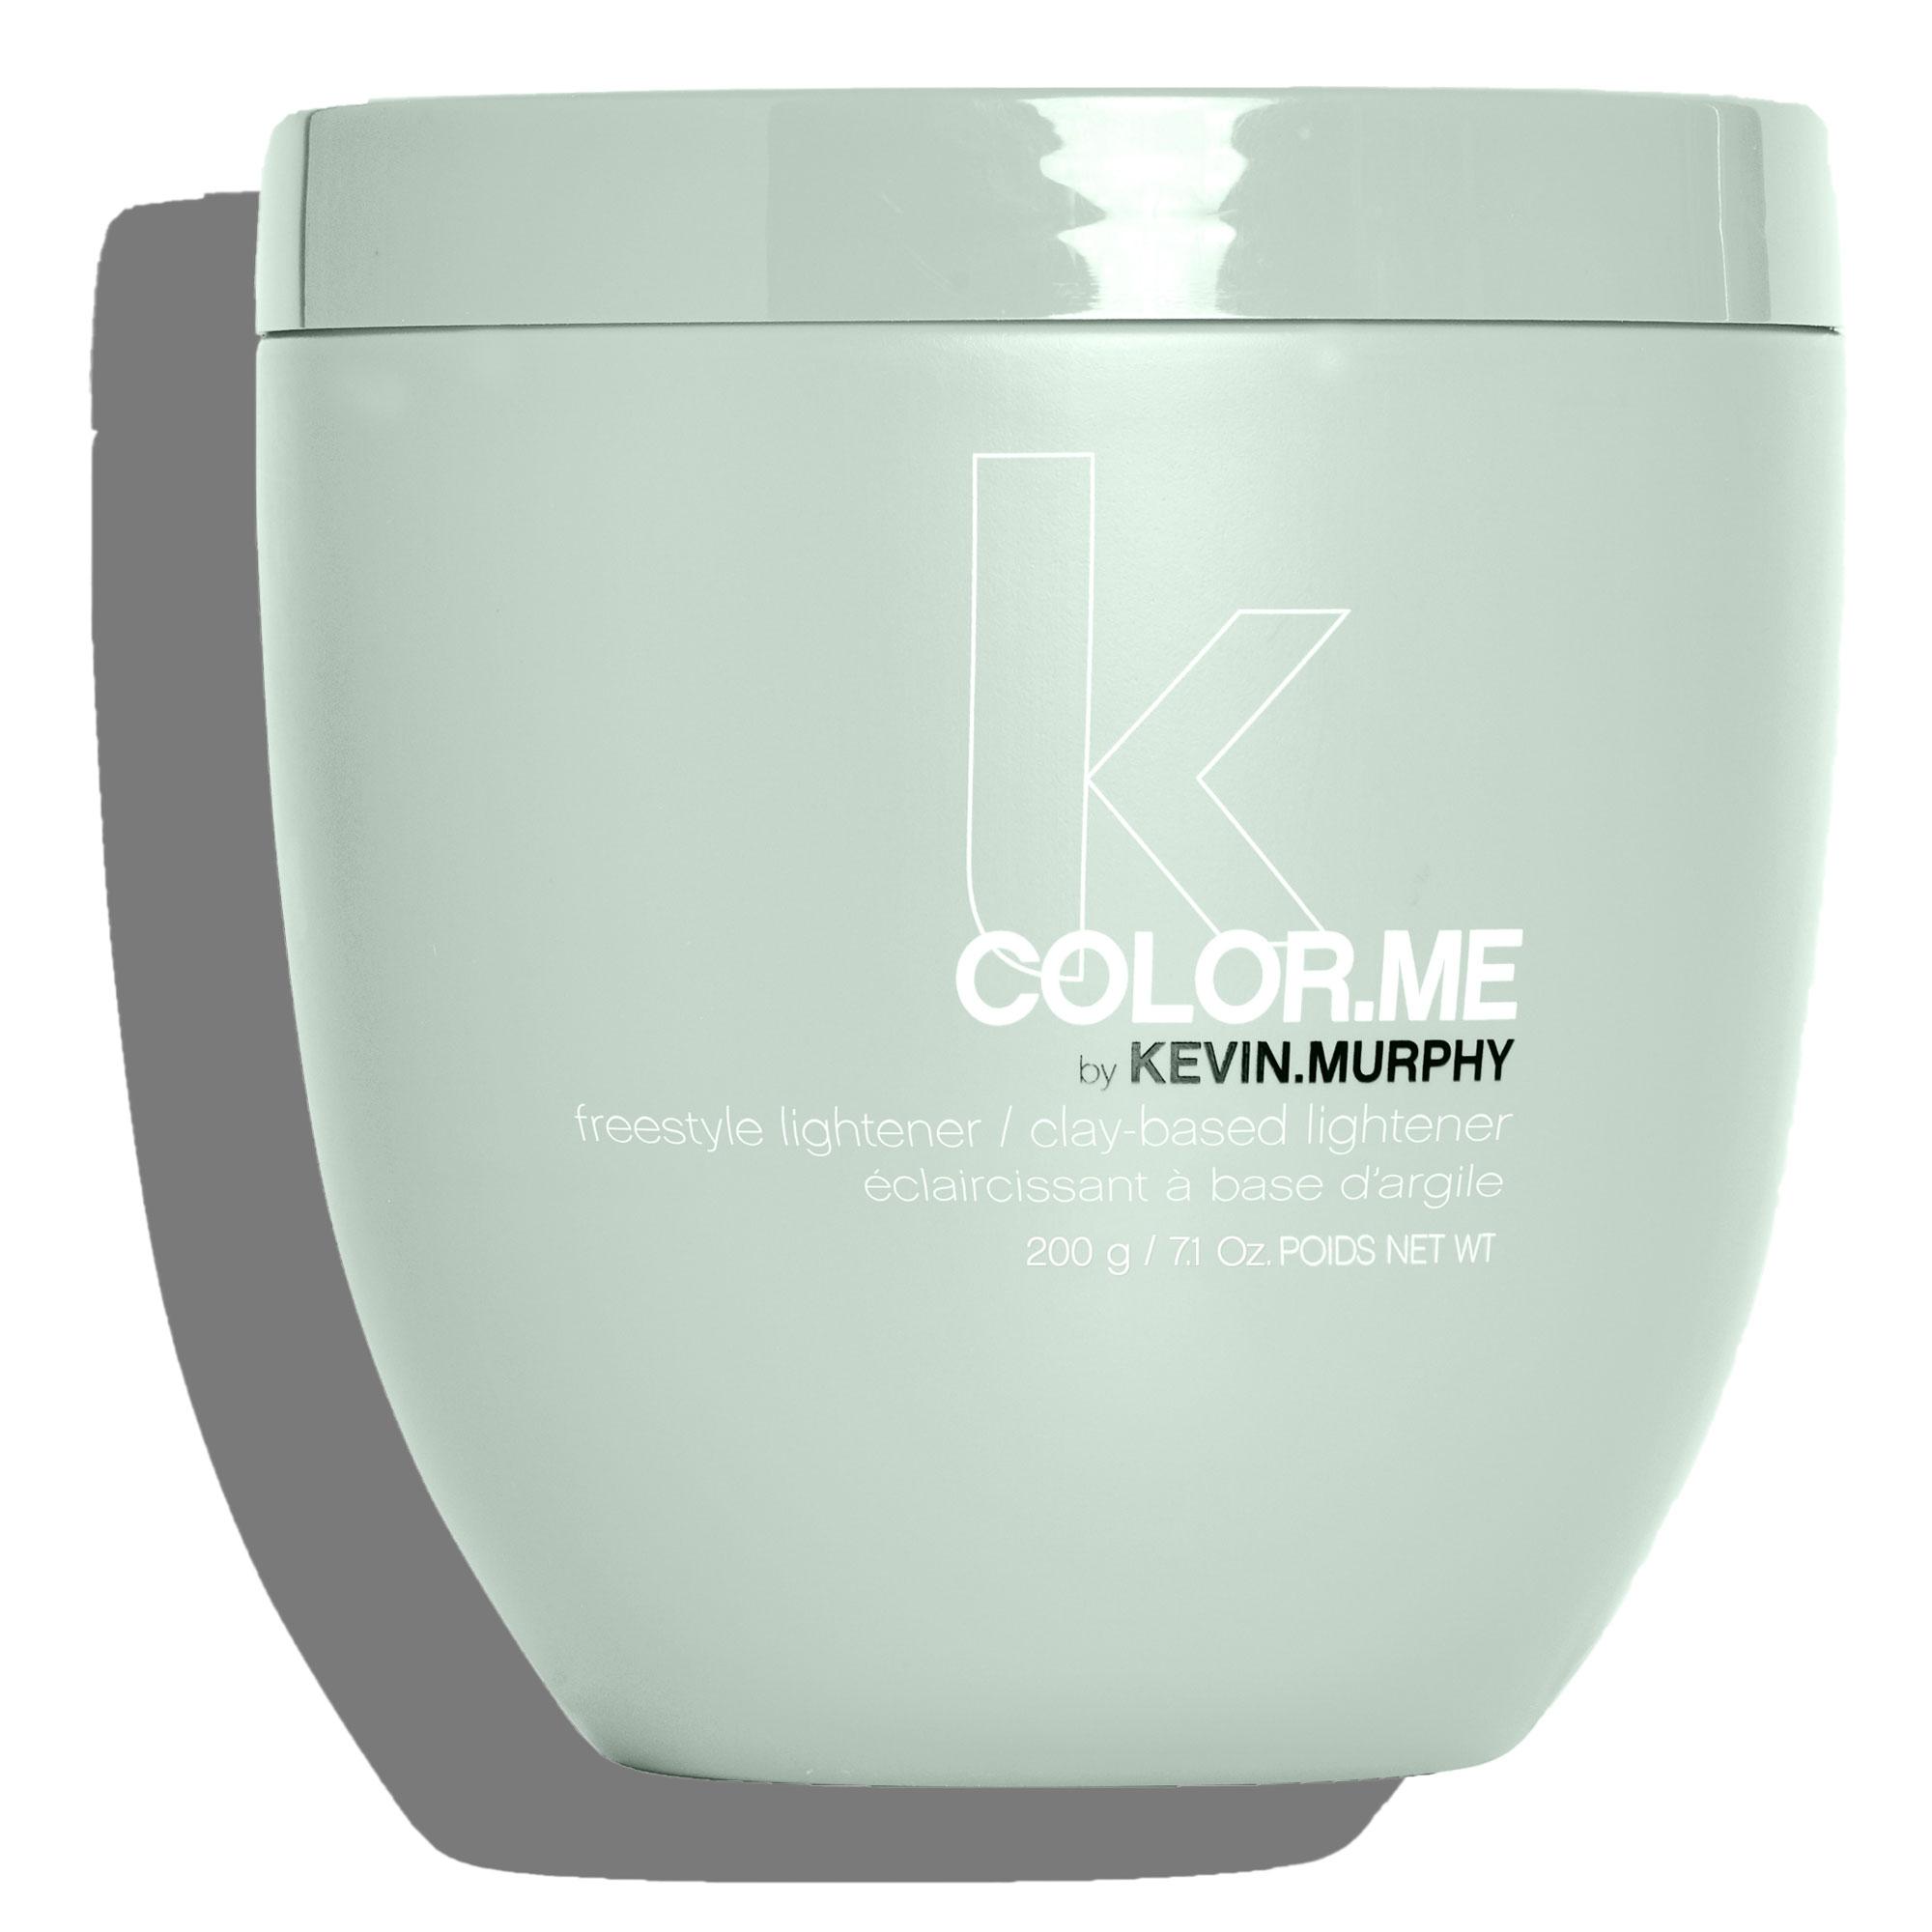 KEVIN.MURPHY COLOR.ME Tools-Freestyle Lightener